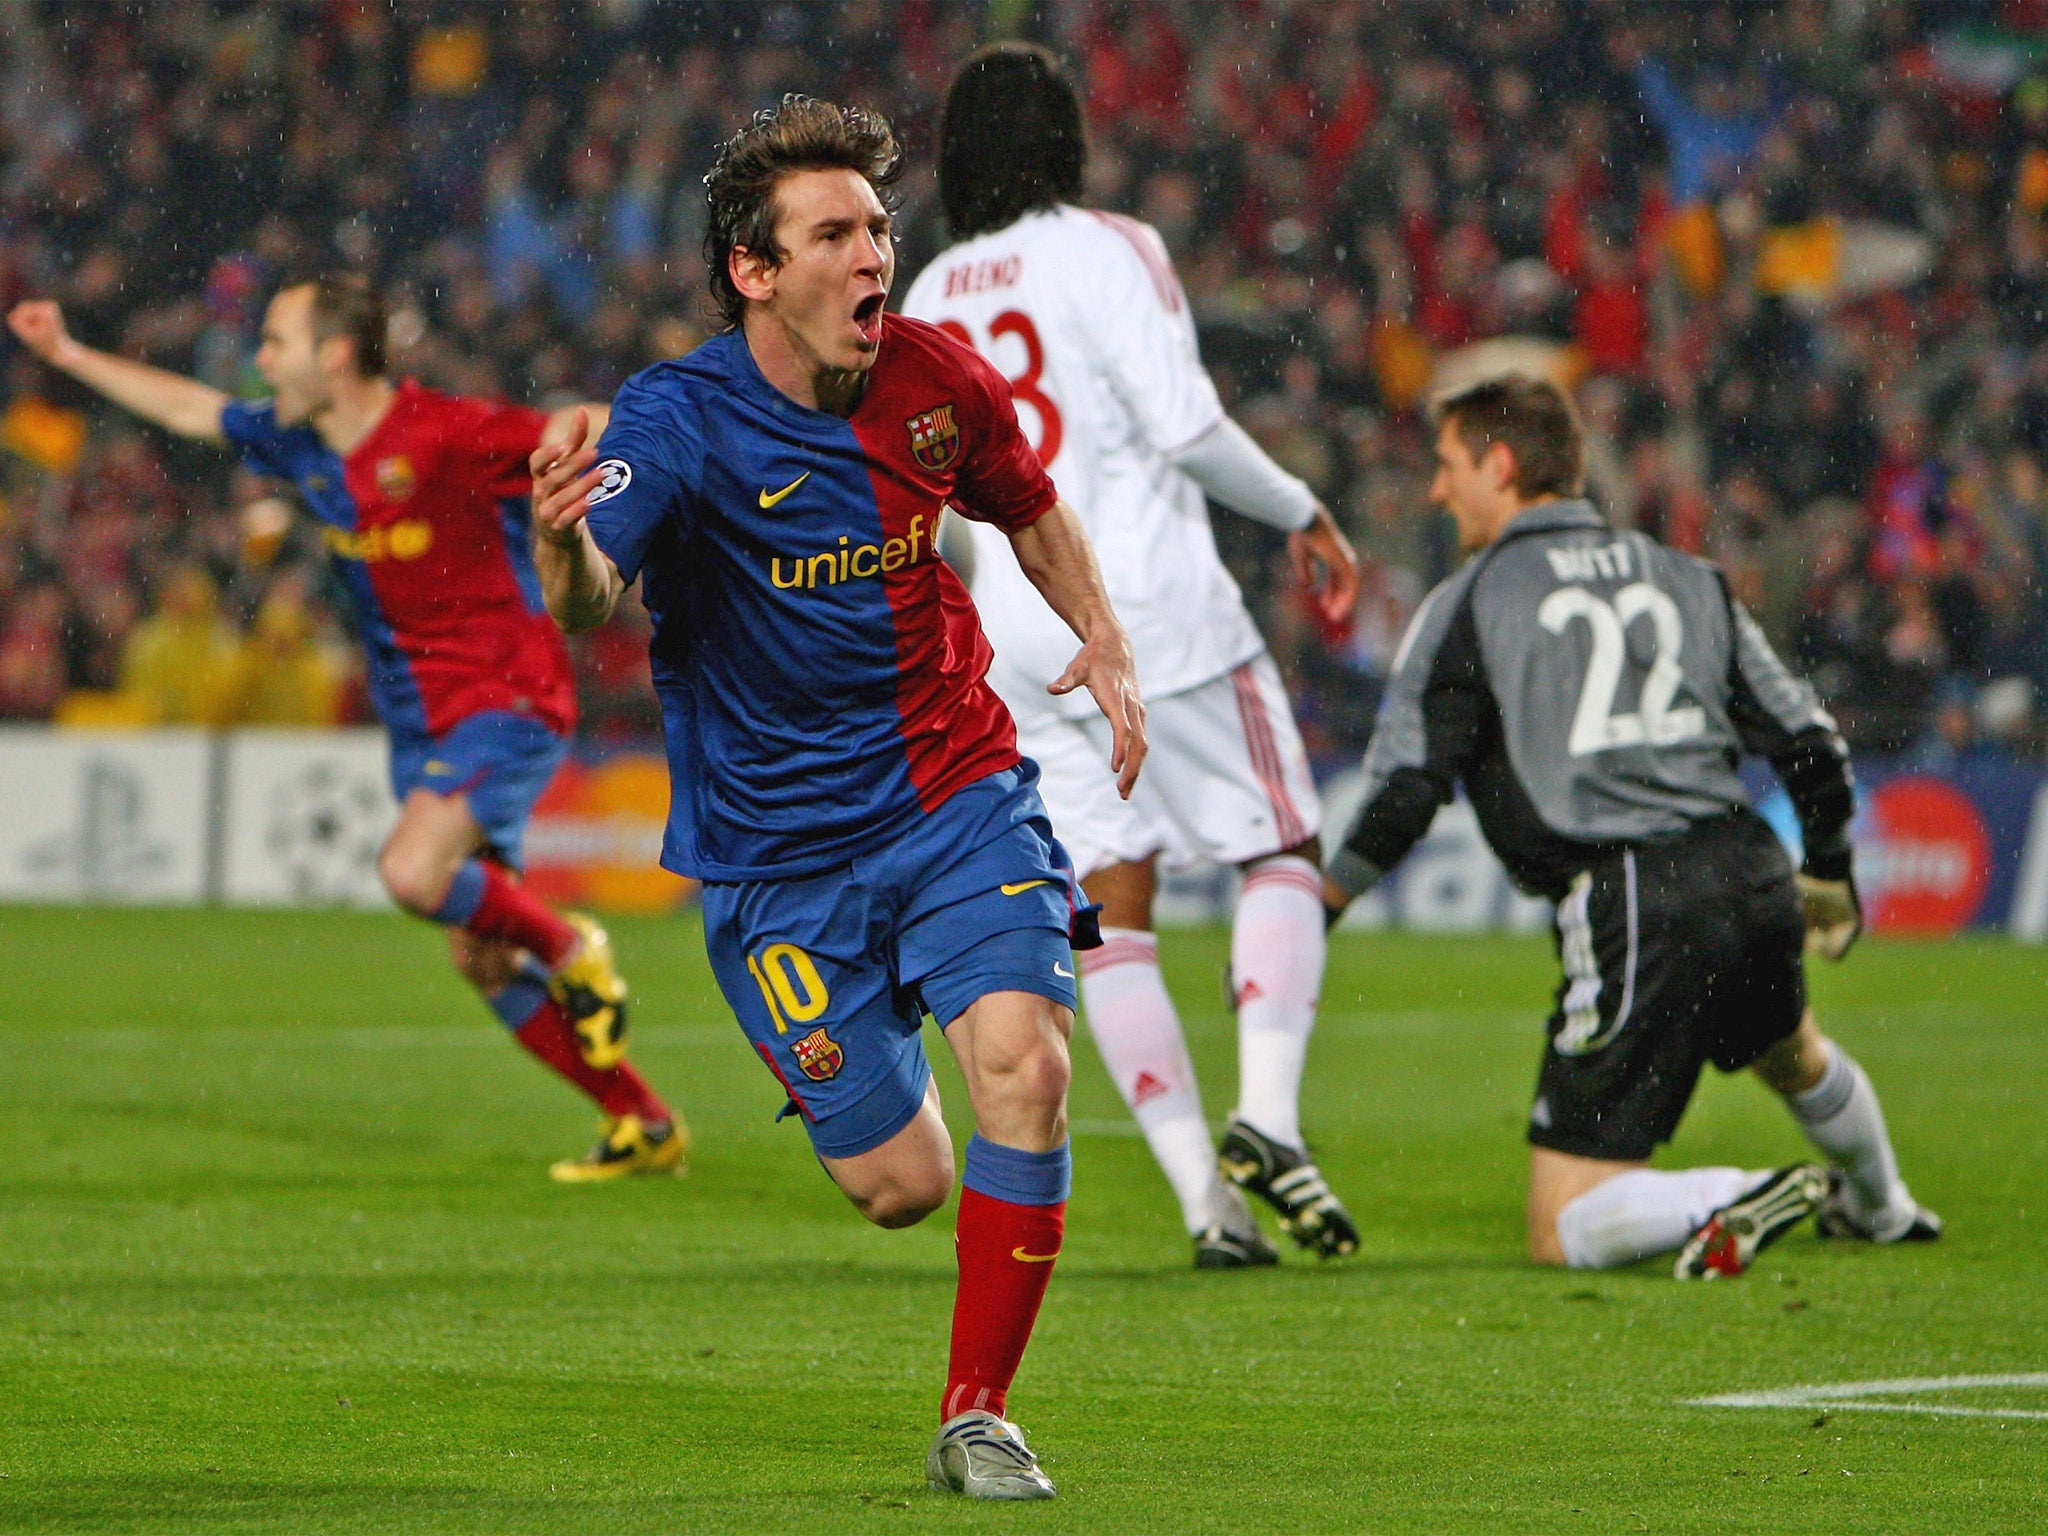 Lionel Messi celebrates one of his two goals against Bayern Munich back in 2009